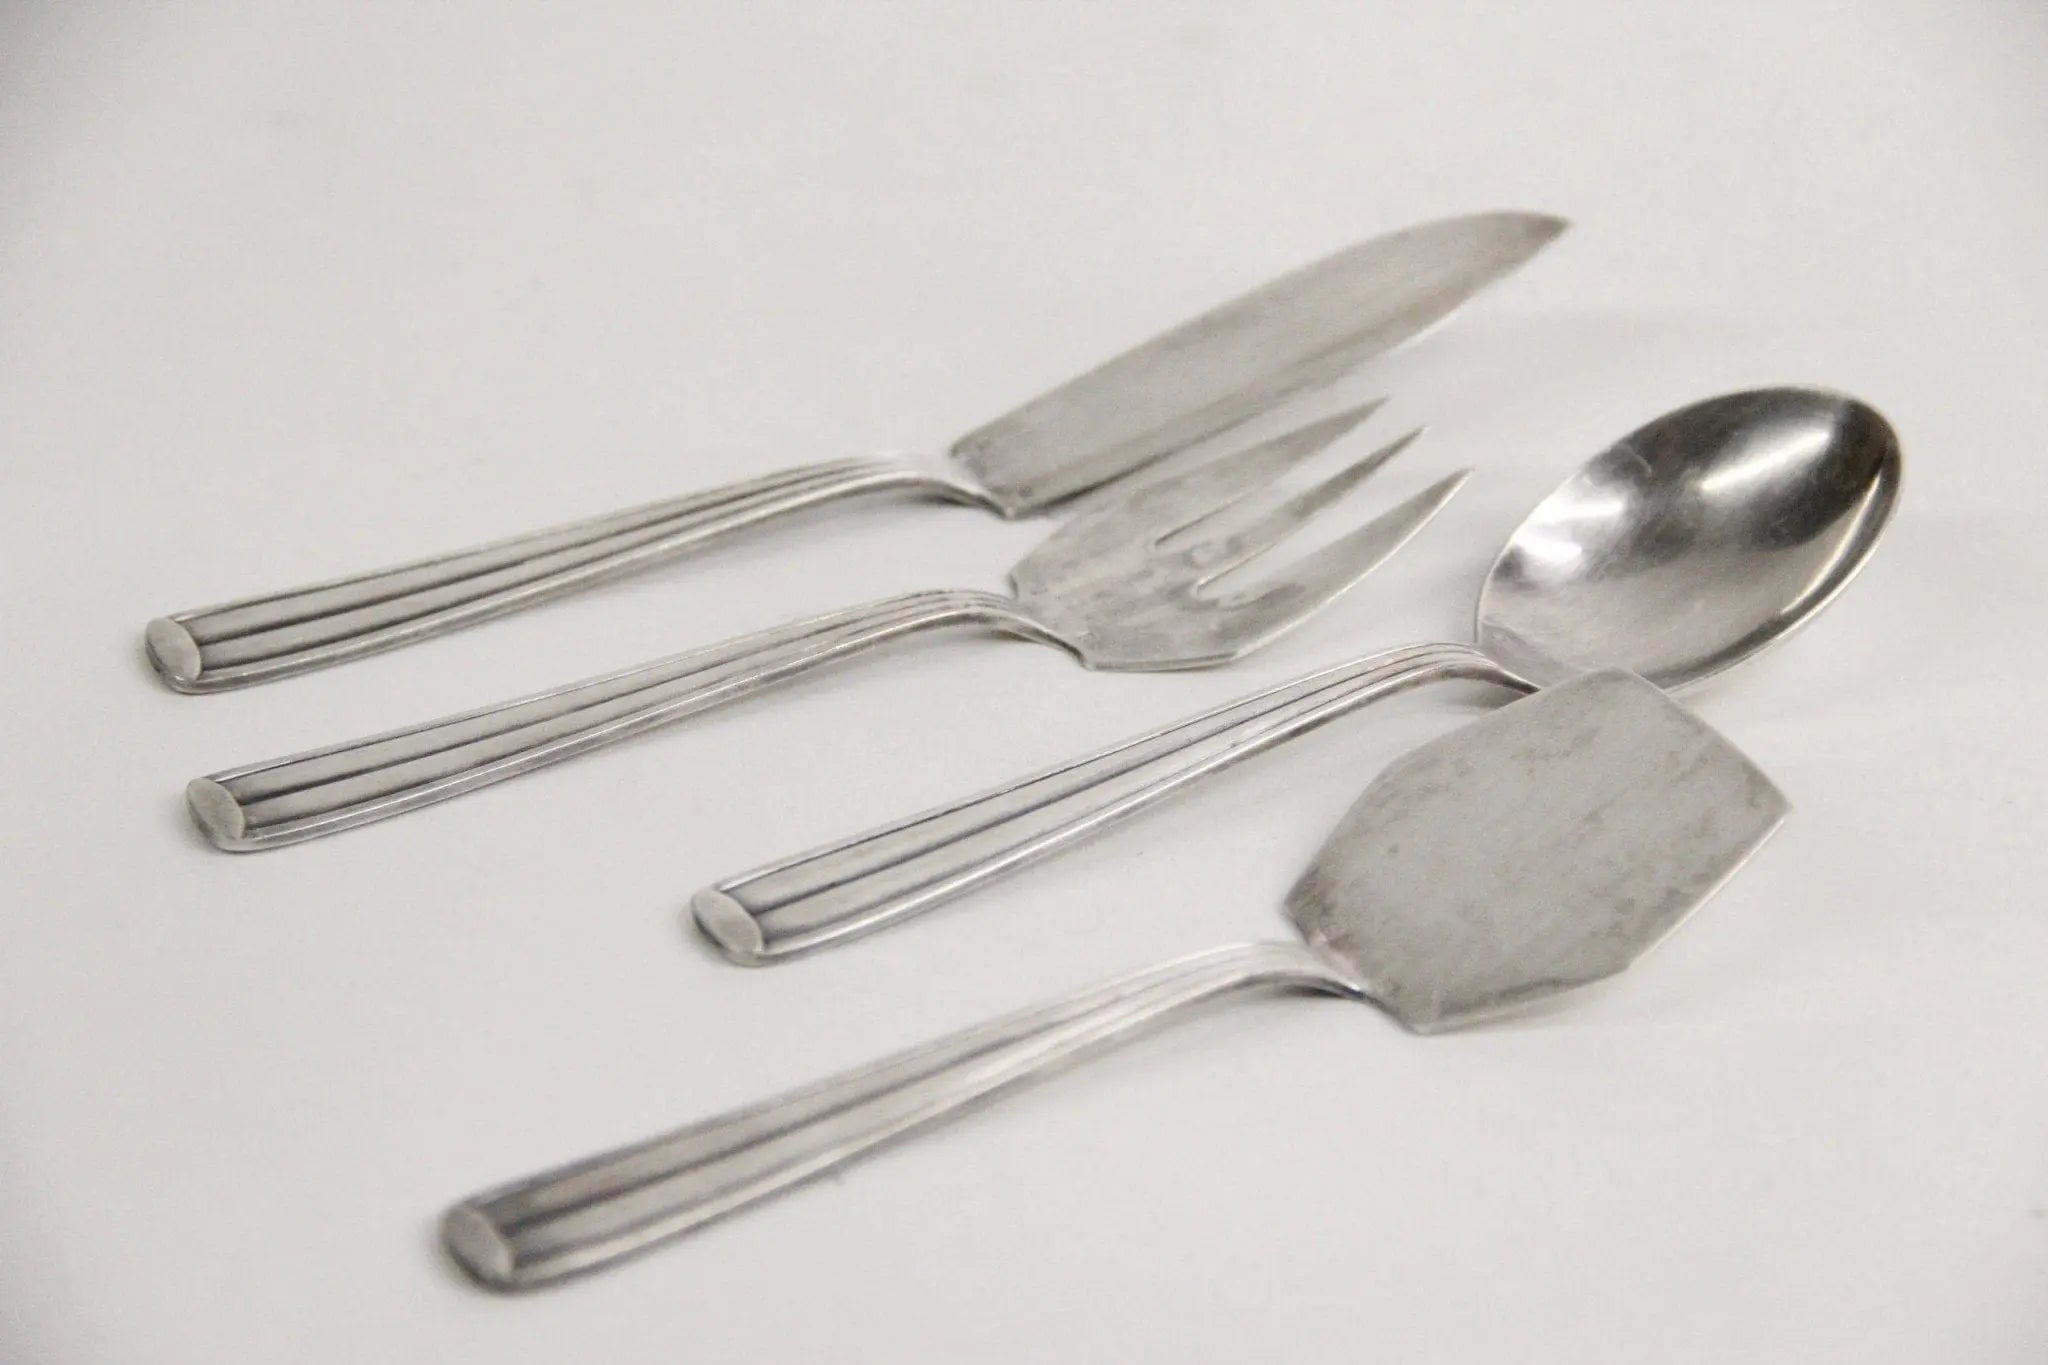 Vintage French Silver Flatware | Hors D'oeuvres Set  Debra Hall Lifestyle